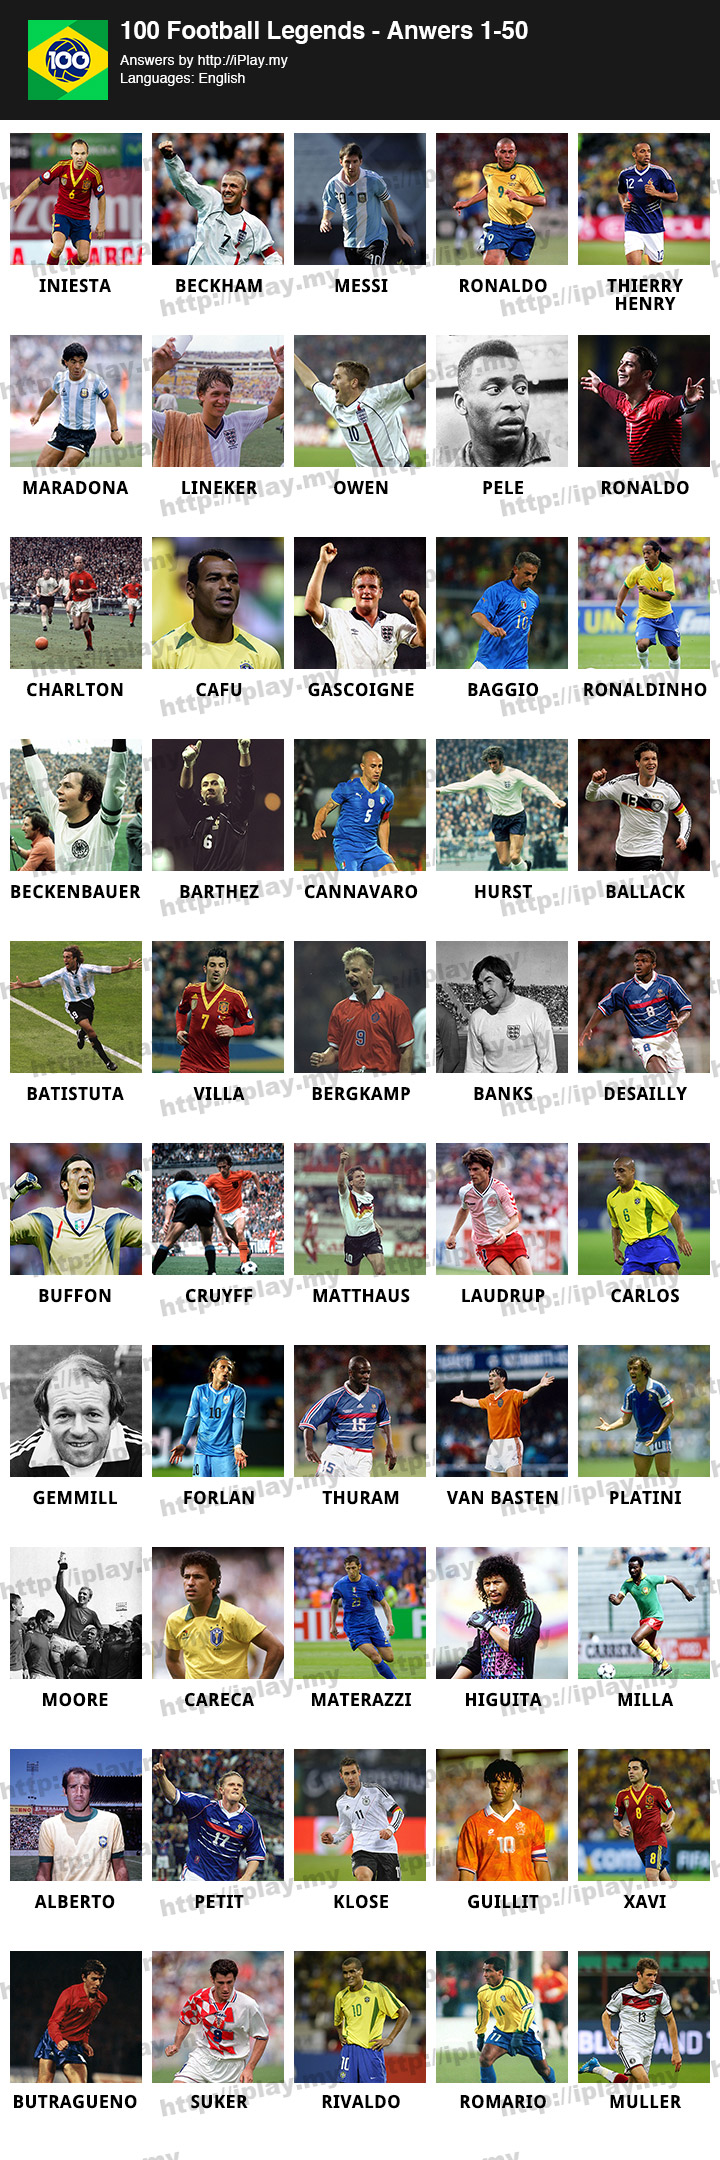 100-Football-Legends-Answers-1-50